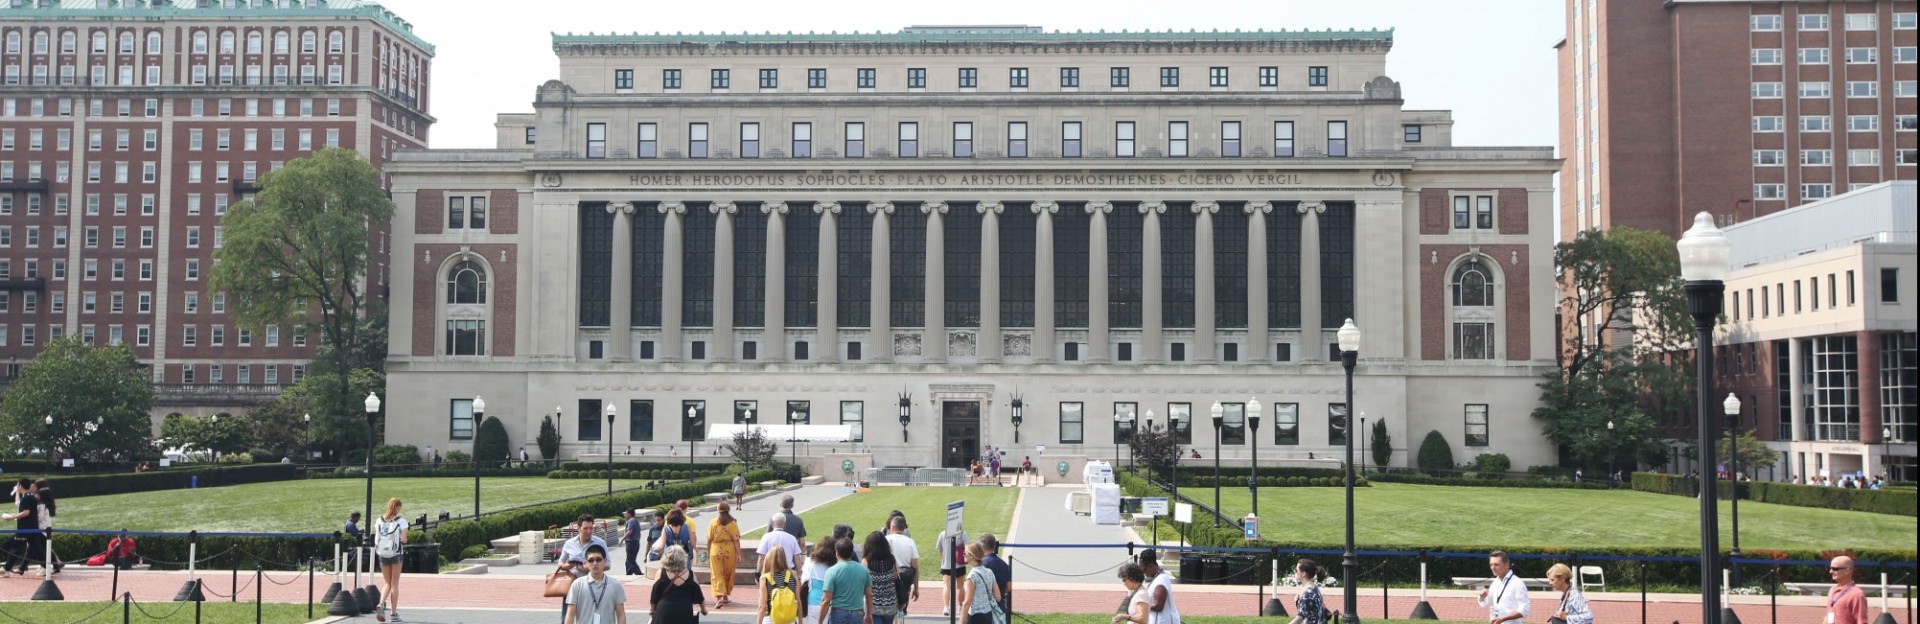 Butler Library at Columbia University